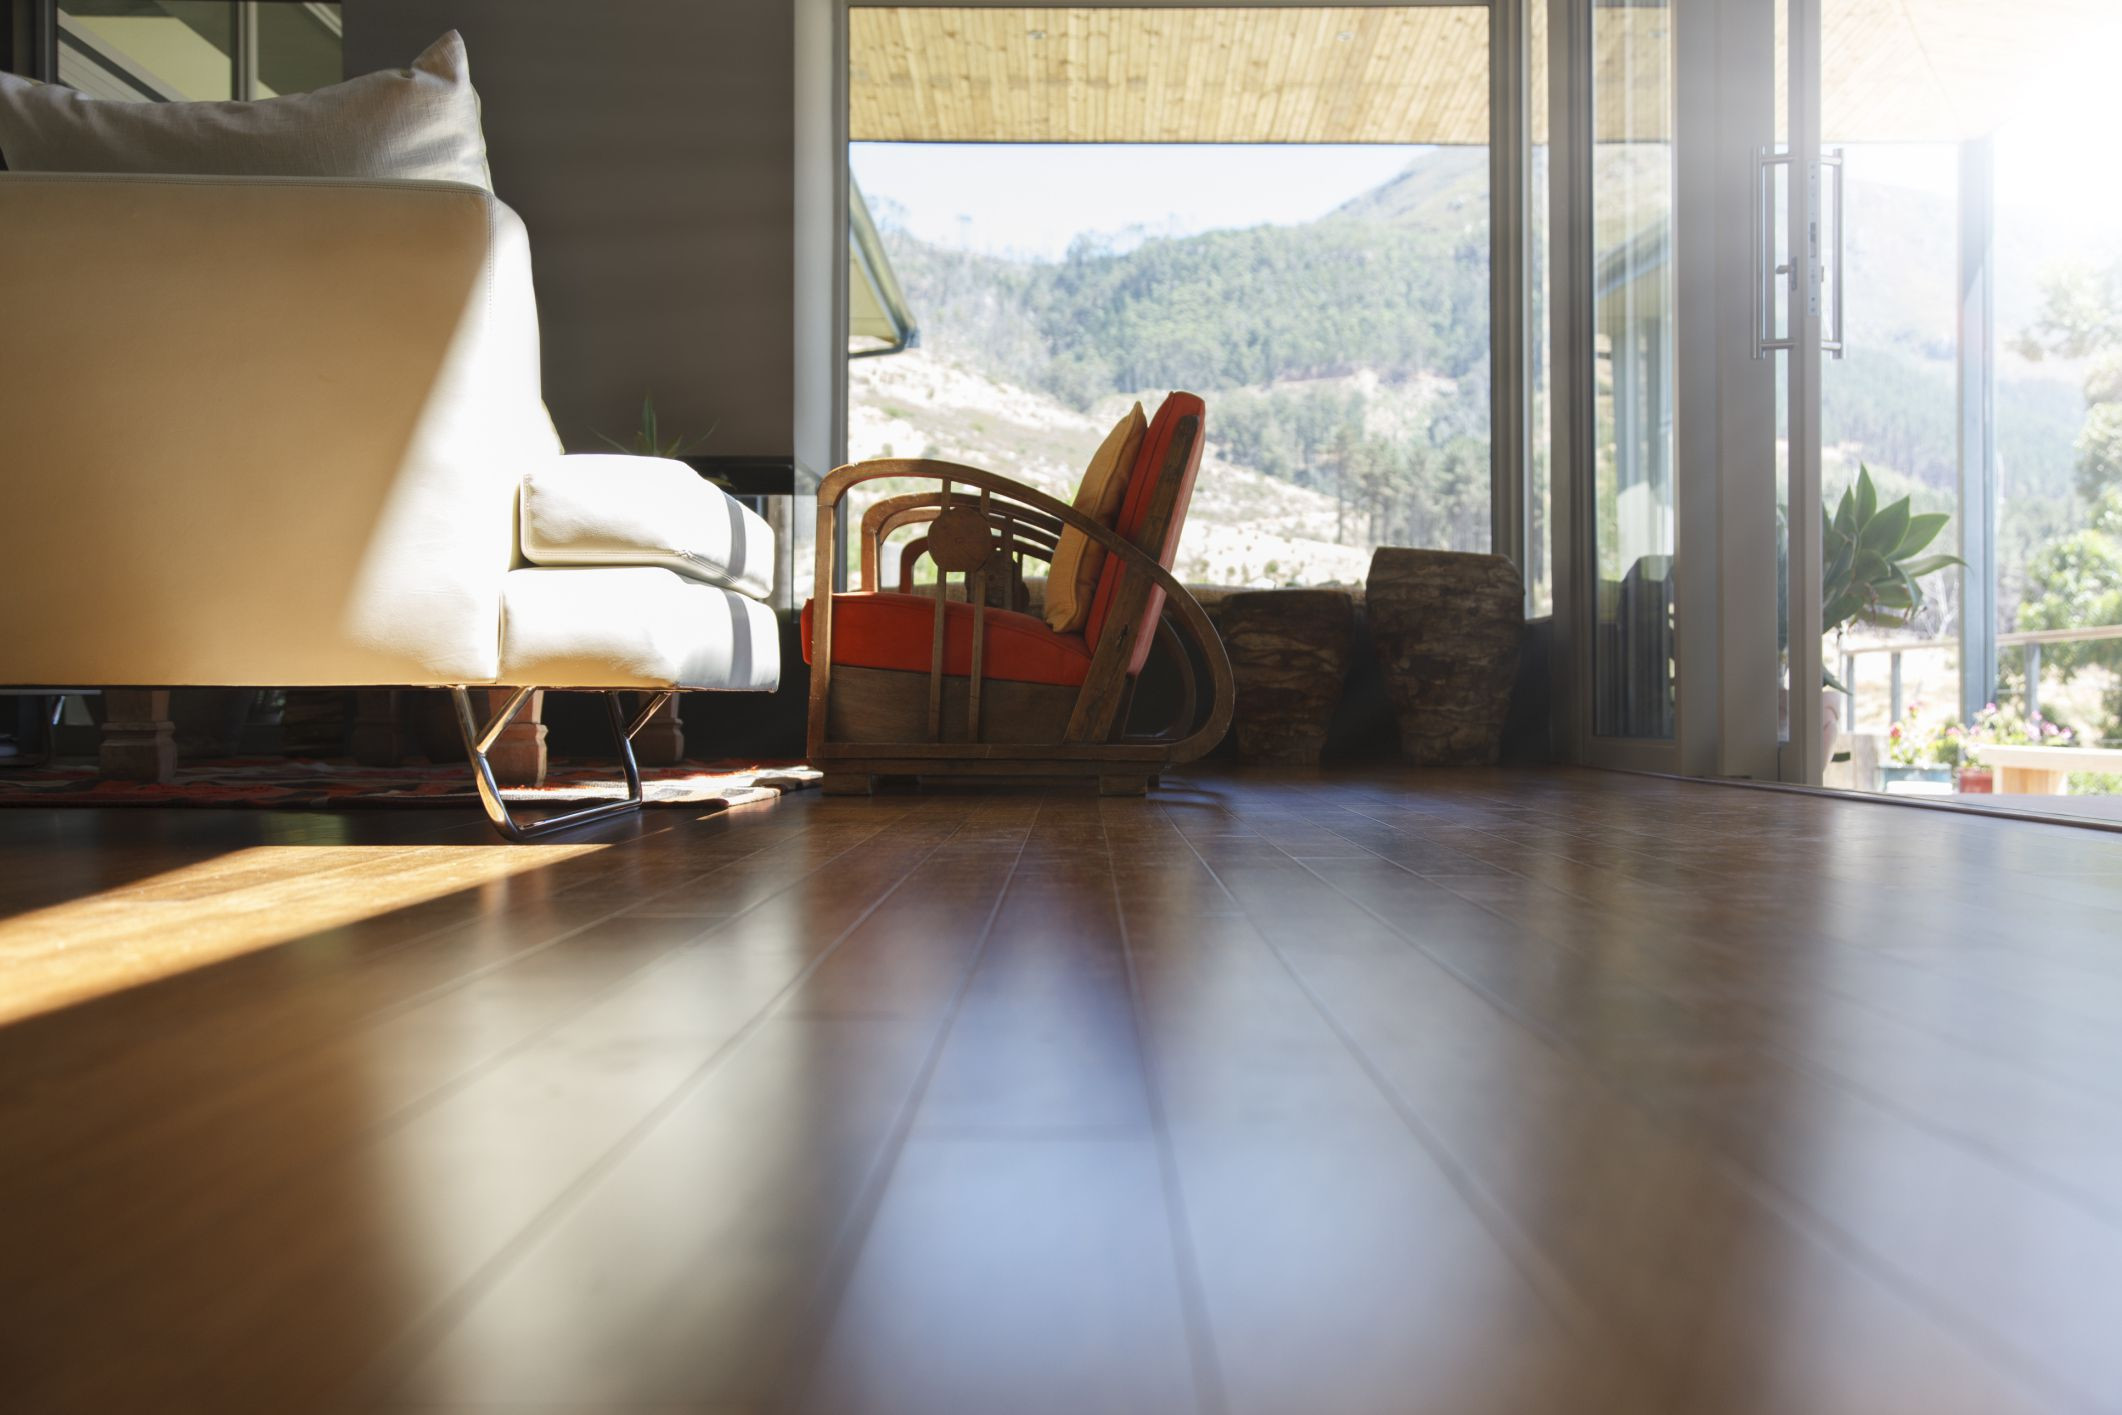 21 Best Hardwood Floor Refinishing Knoxville Tn 2024 free download hardwood floor refinishing knoxville tn of pros and cons of bellawood flooring from lumber liquidators with regard to exotic hardwood flooring 525439899 56a49d3a3df78cf77283453d